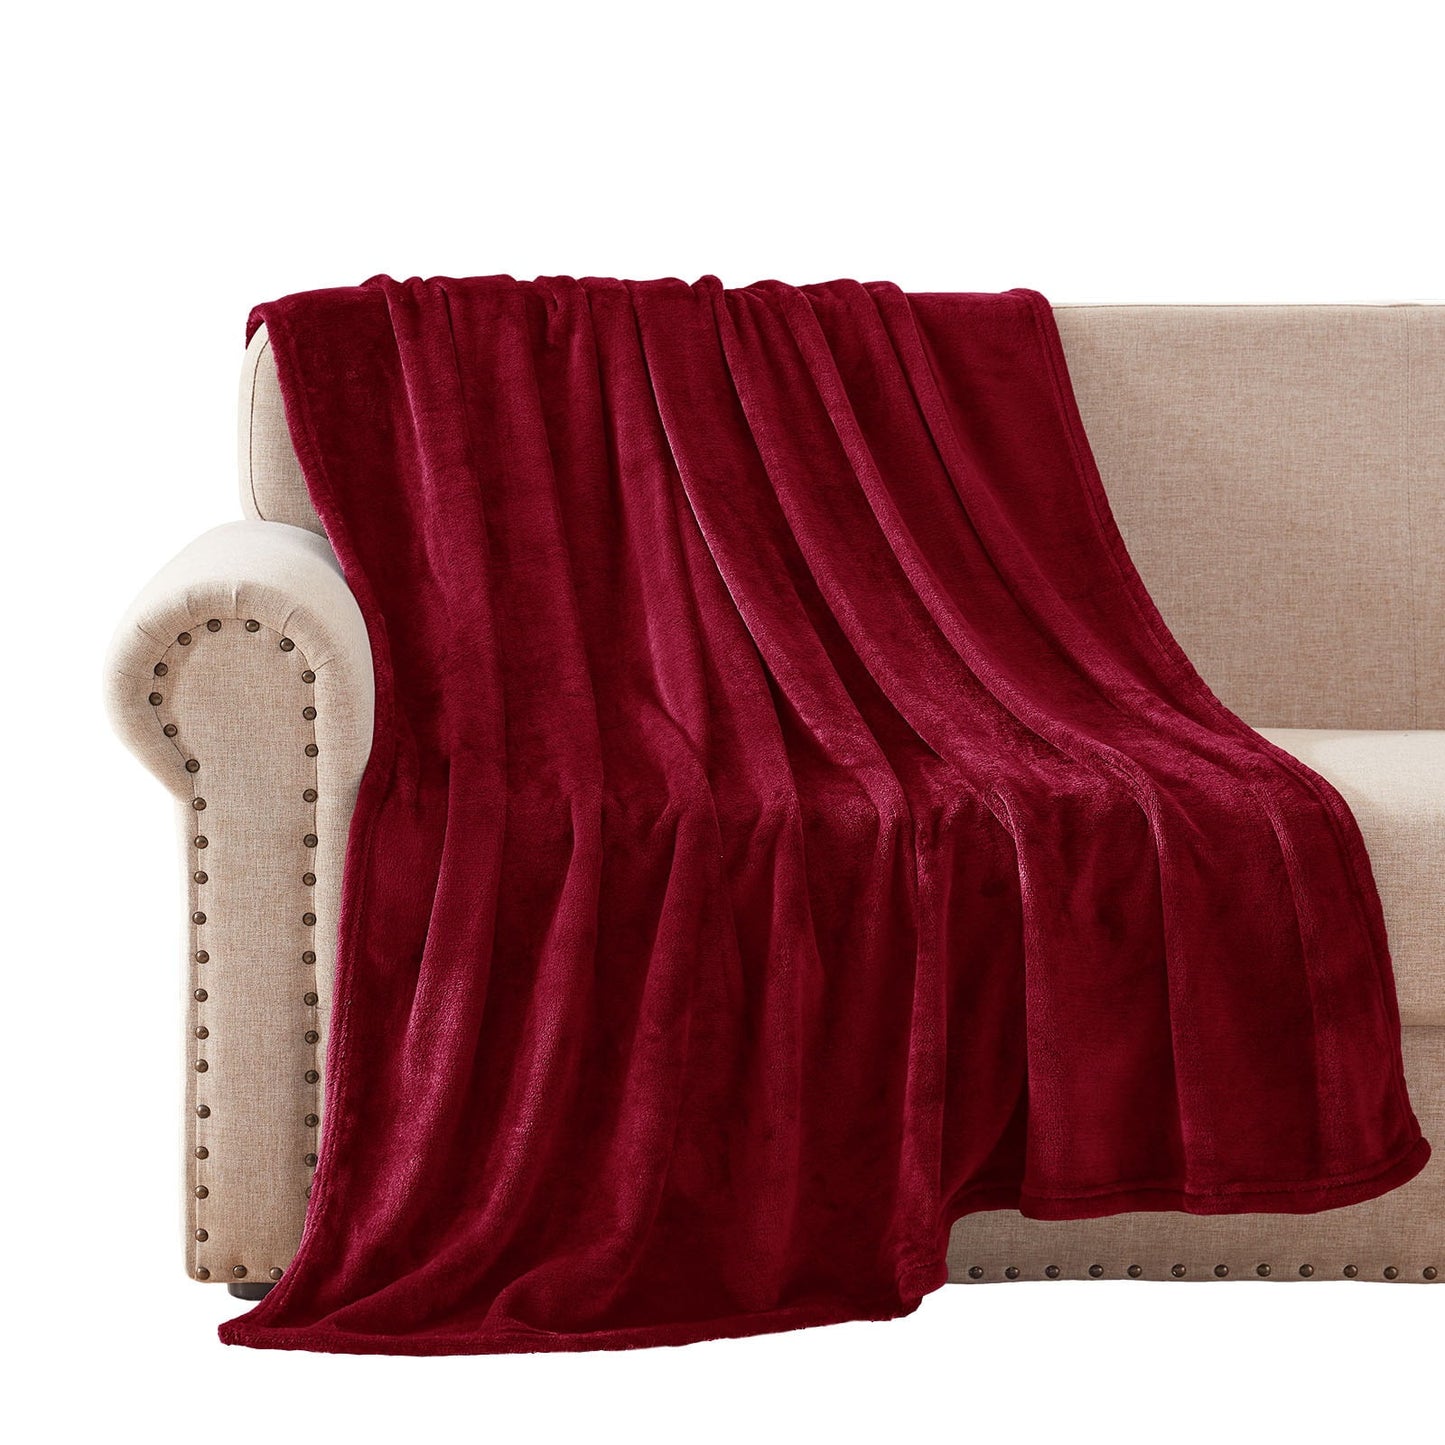 Exclusivo Mezcla Fleece Throw Blanket for Couch/Sofa/Bed,Plush Soft Blankets and Throws,Lightweight and Cozy-50" x 60" (Burgundy)